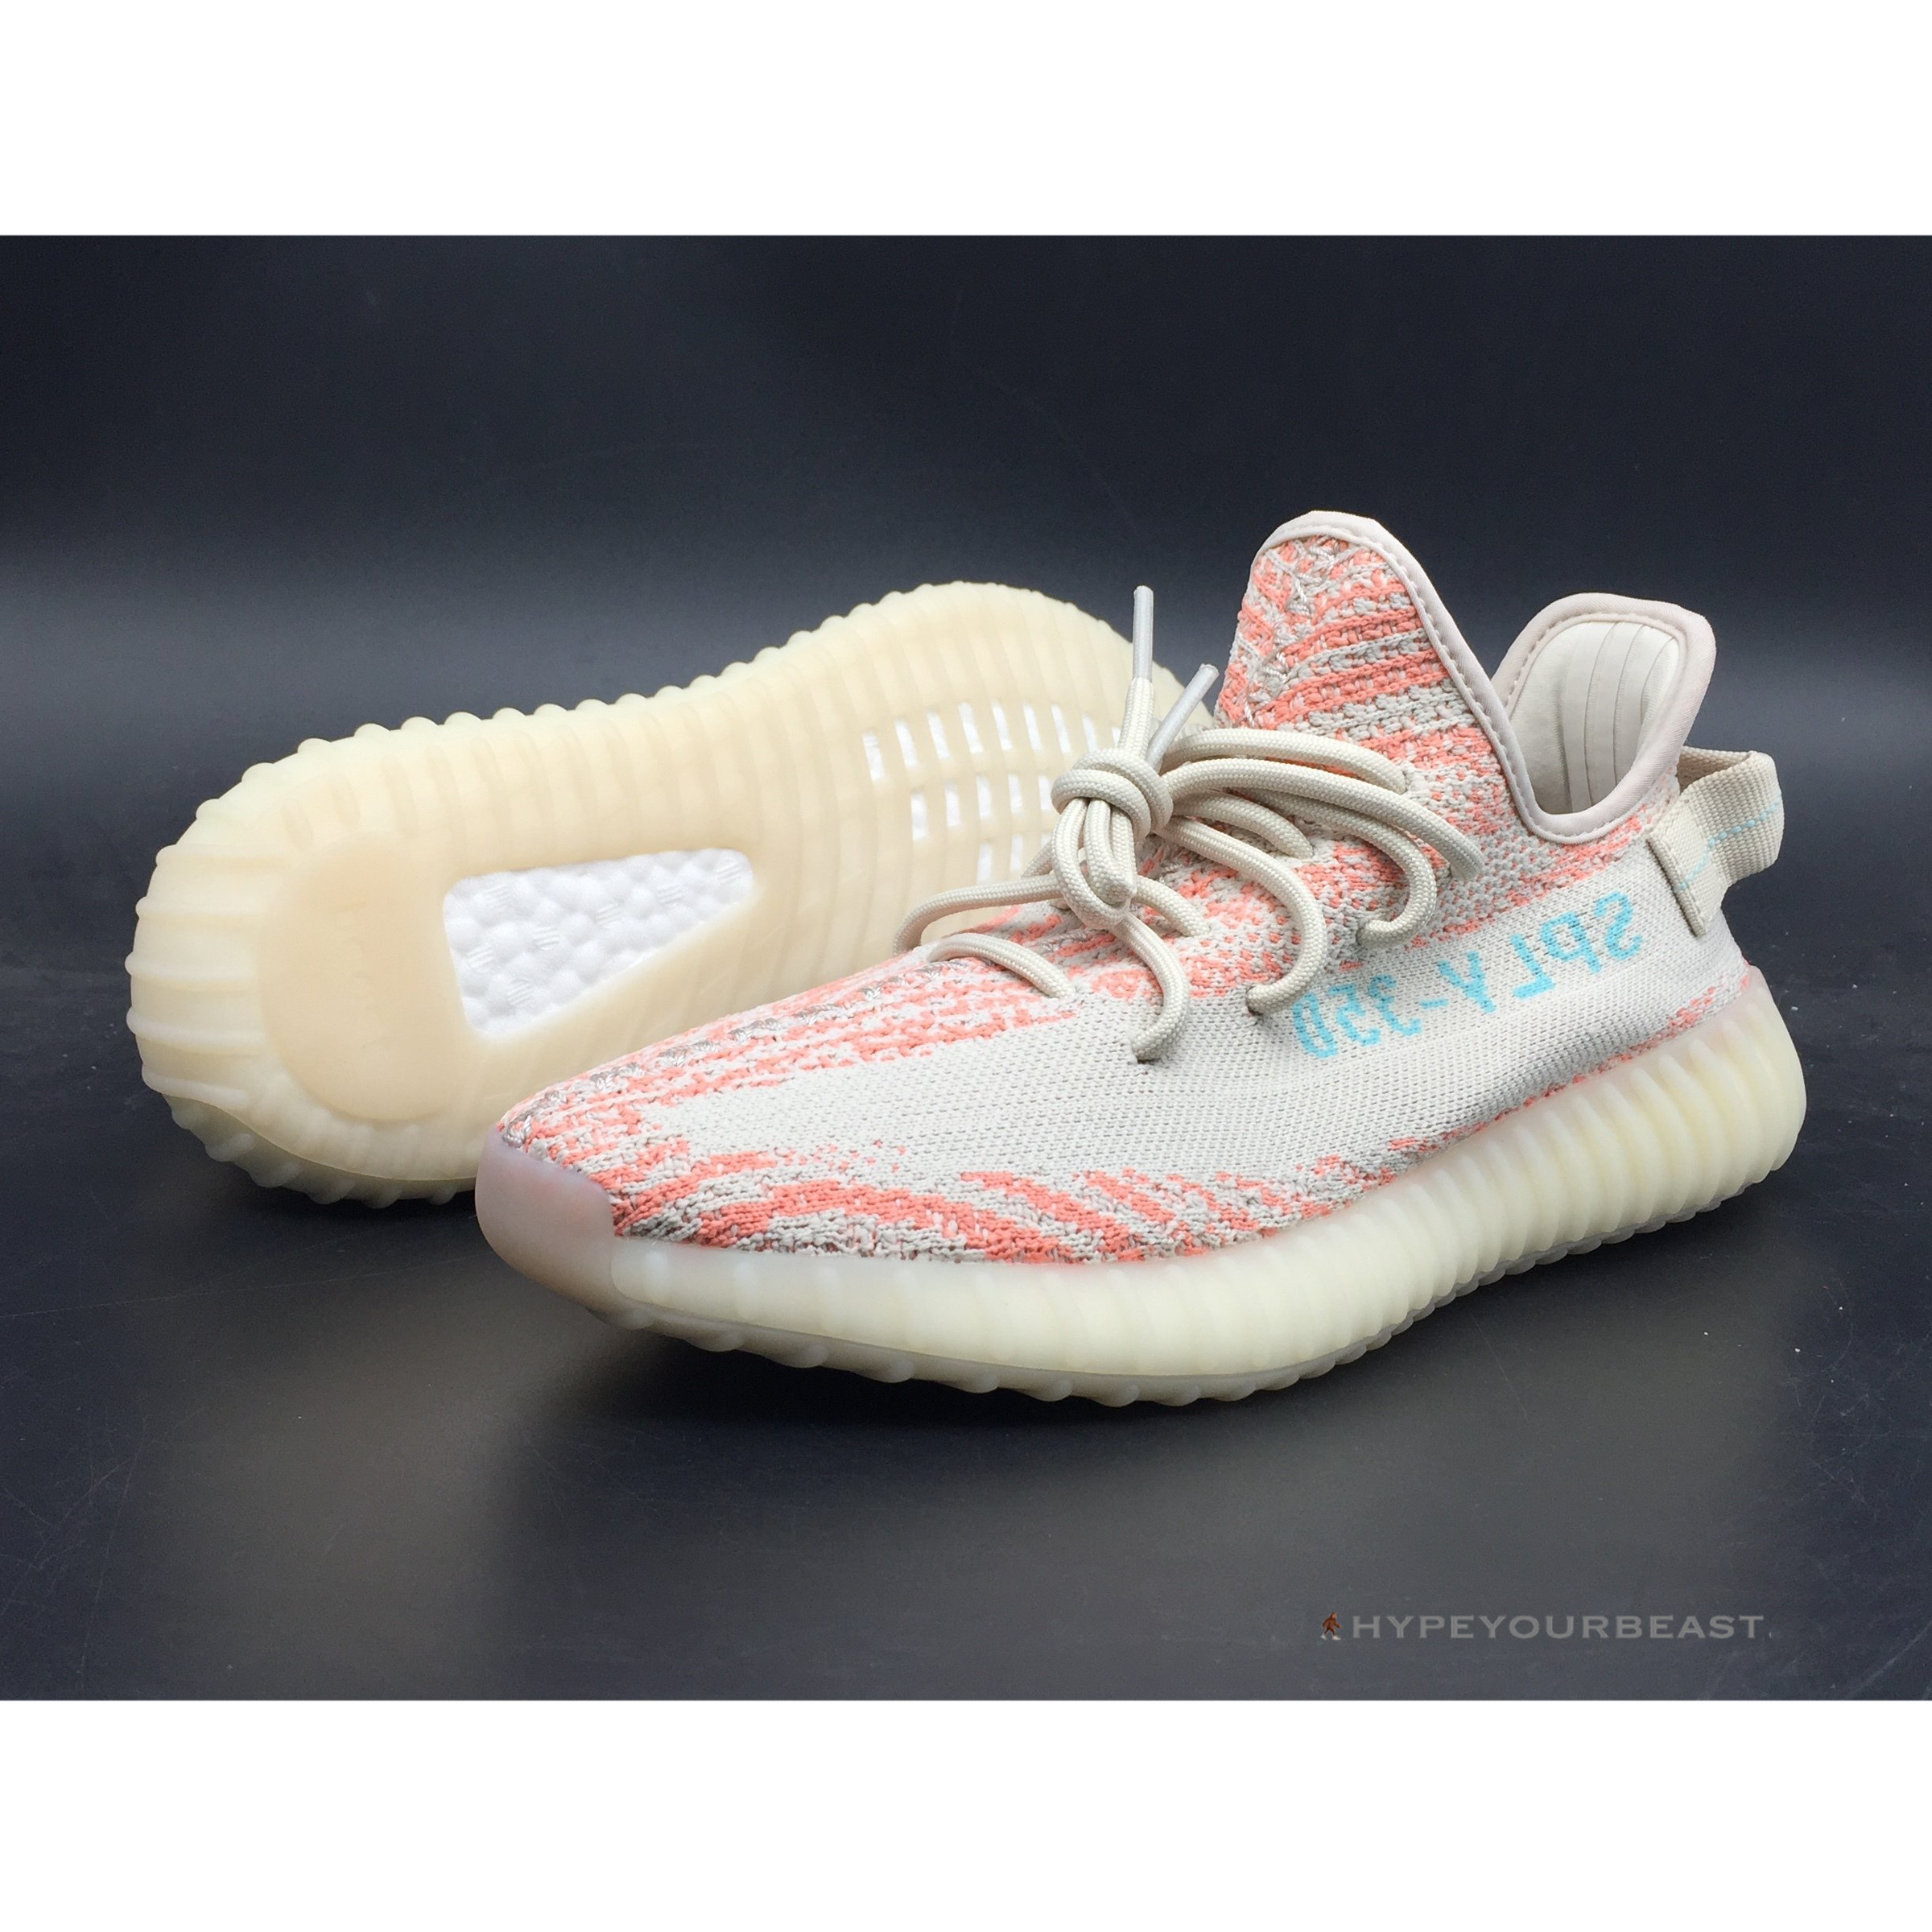 yeezy boost 350 for sale pink